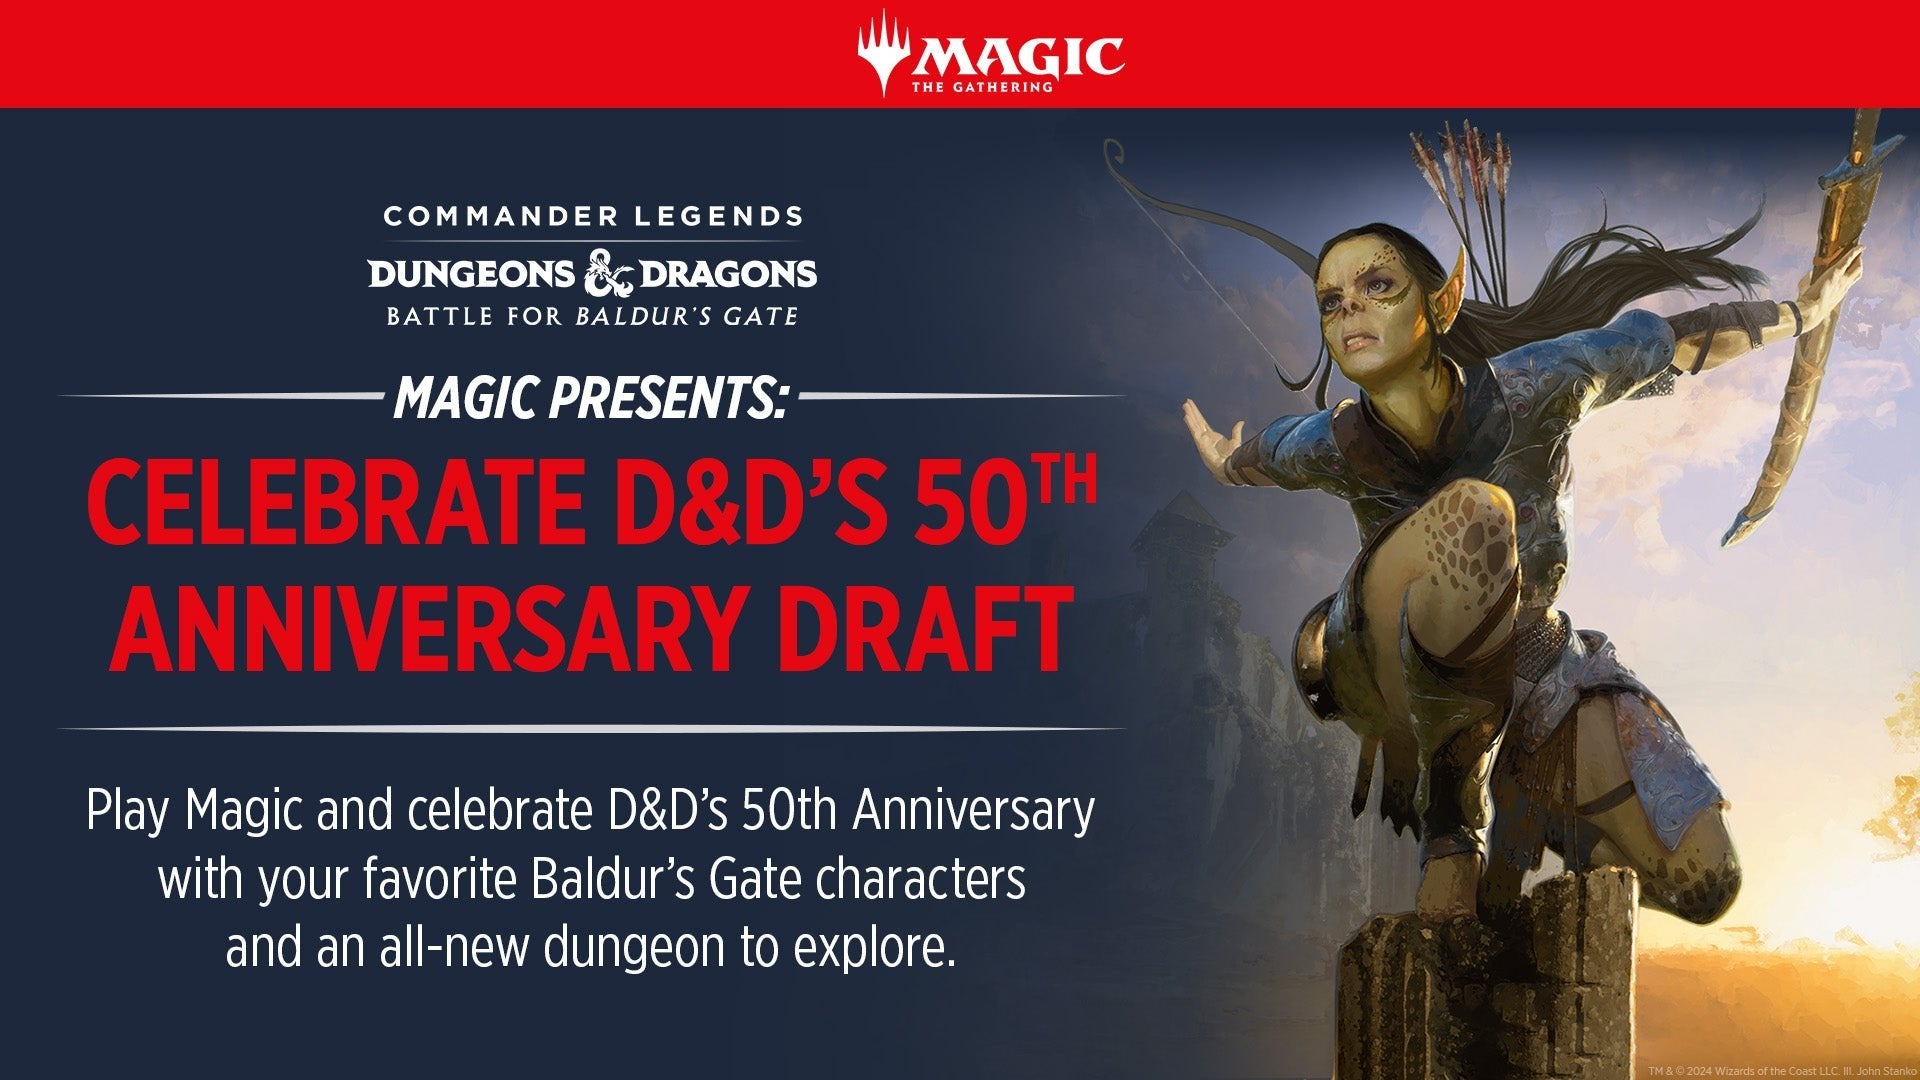 Event Ticket for The Magic Presents: Battle for Baldur's Gate – 50th Anniversary Edition from The Compleat Strategist at The Compleat Strategist